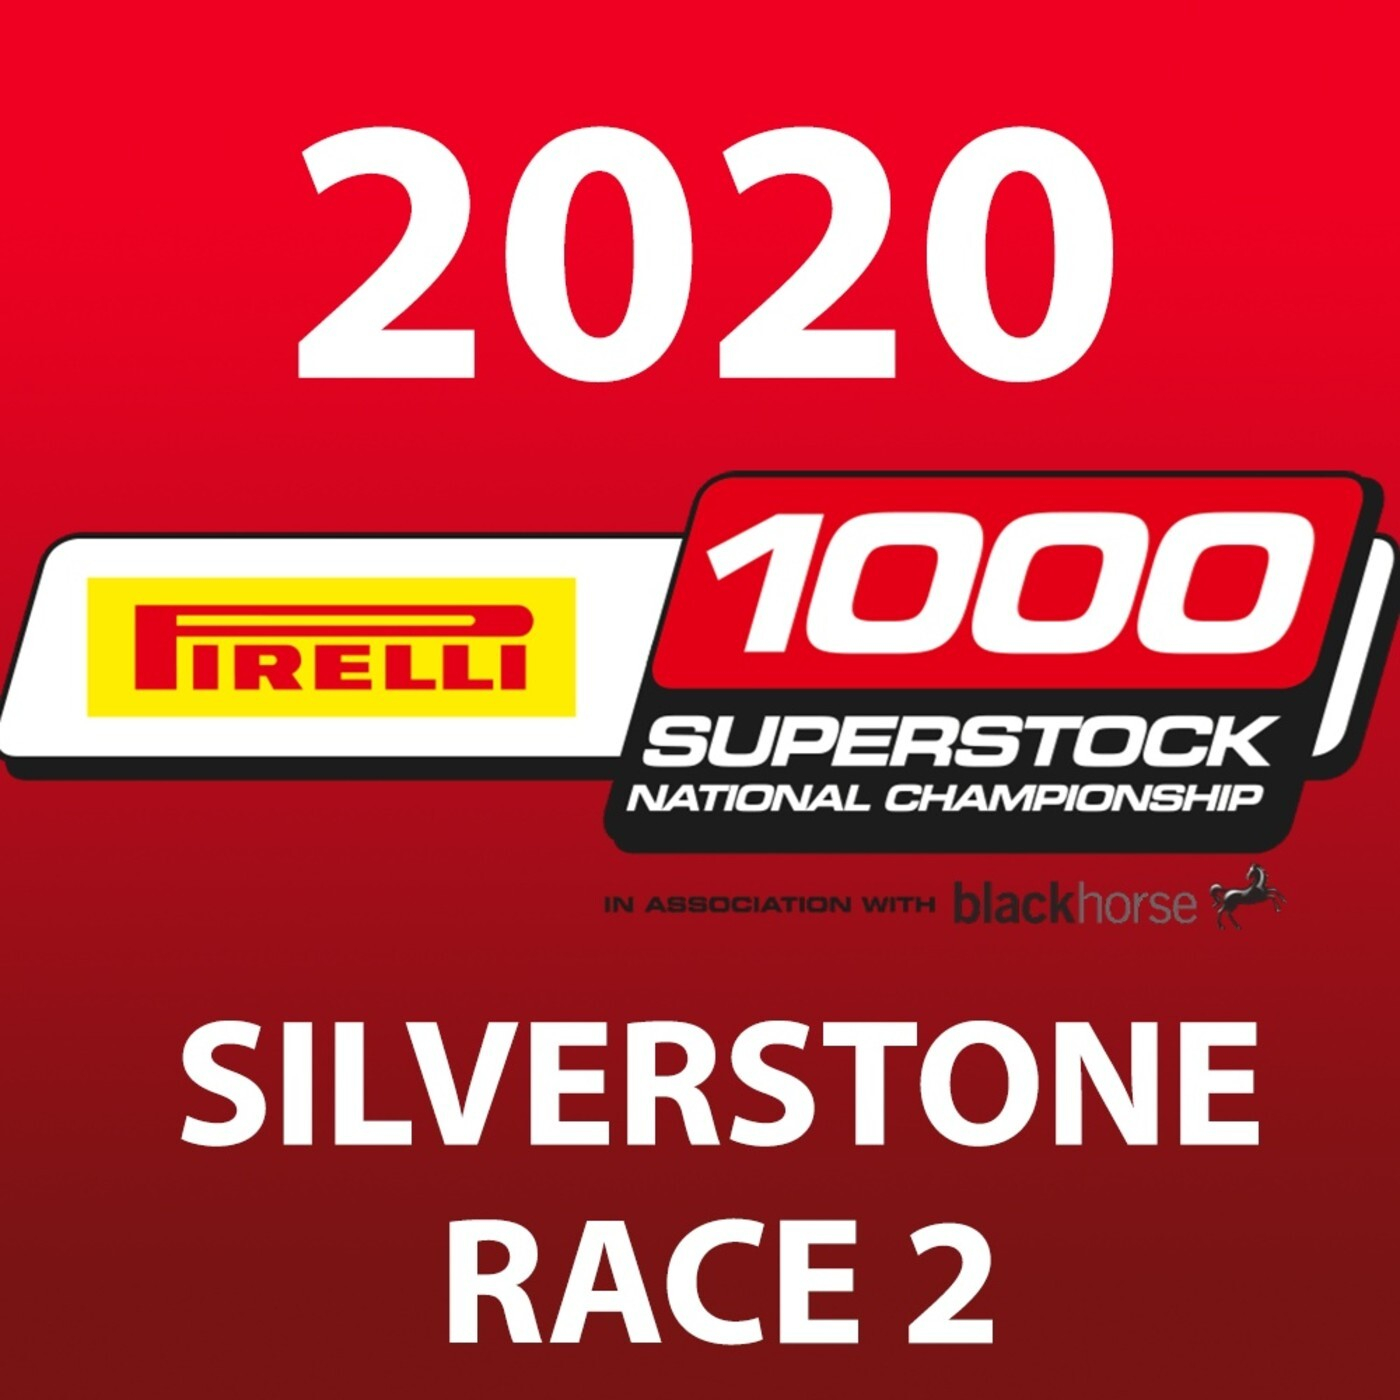 Pirelli National Superstock 1000 in association with Black Horse - Silverstone 2020 Race 2